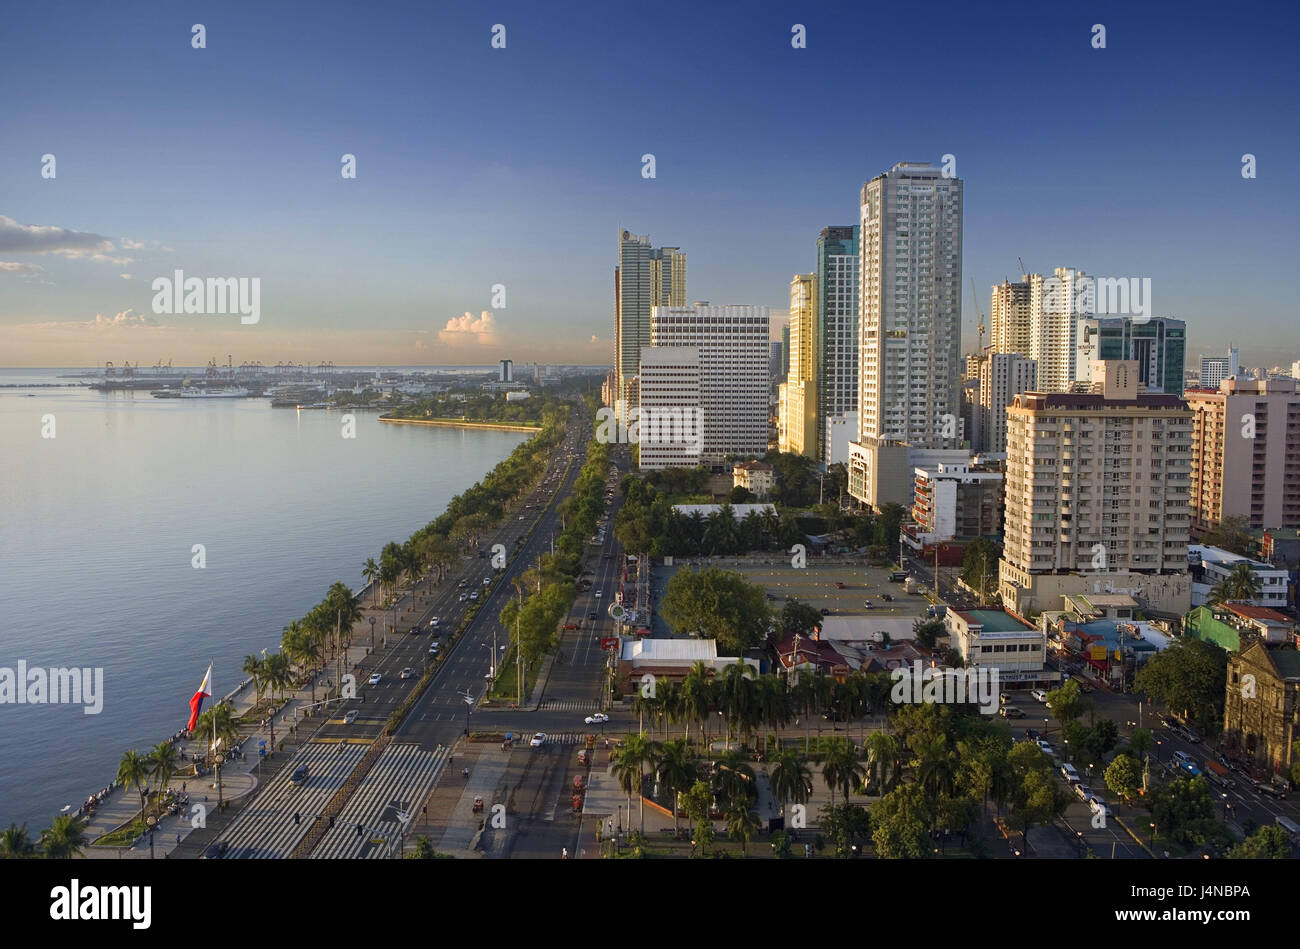 The Philippines, island Luzon, Manila, town view, Roxas boulevard, sea, town, capital, building, houses, architecture, high rises, street, Stock Photo